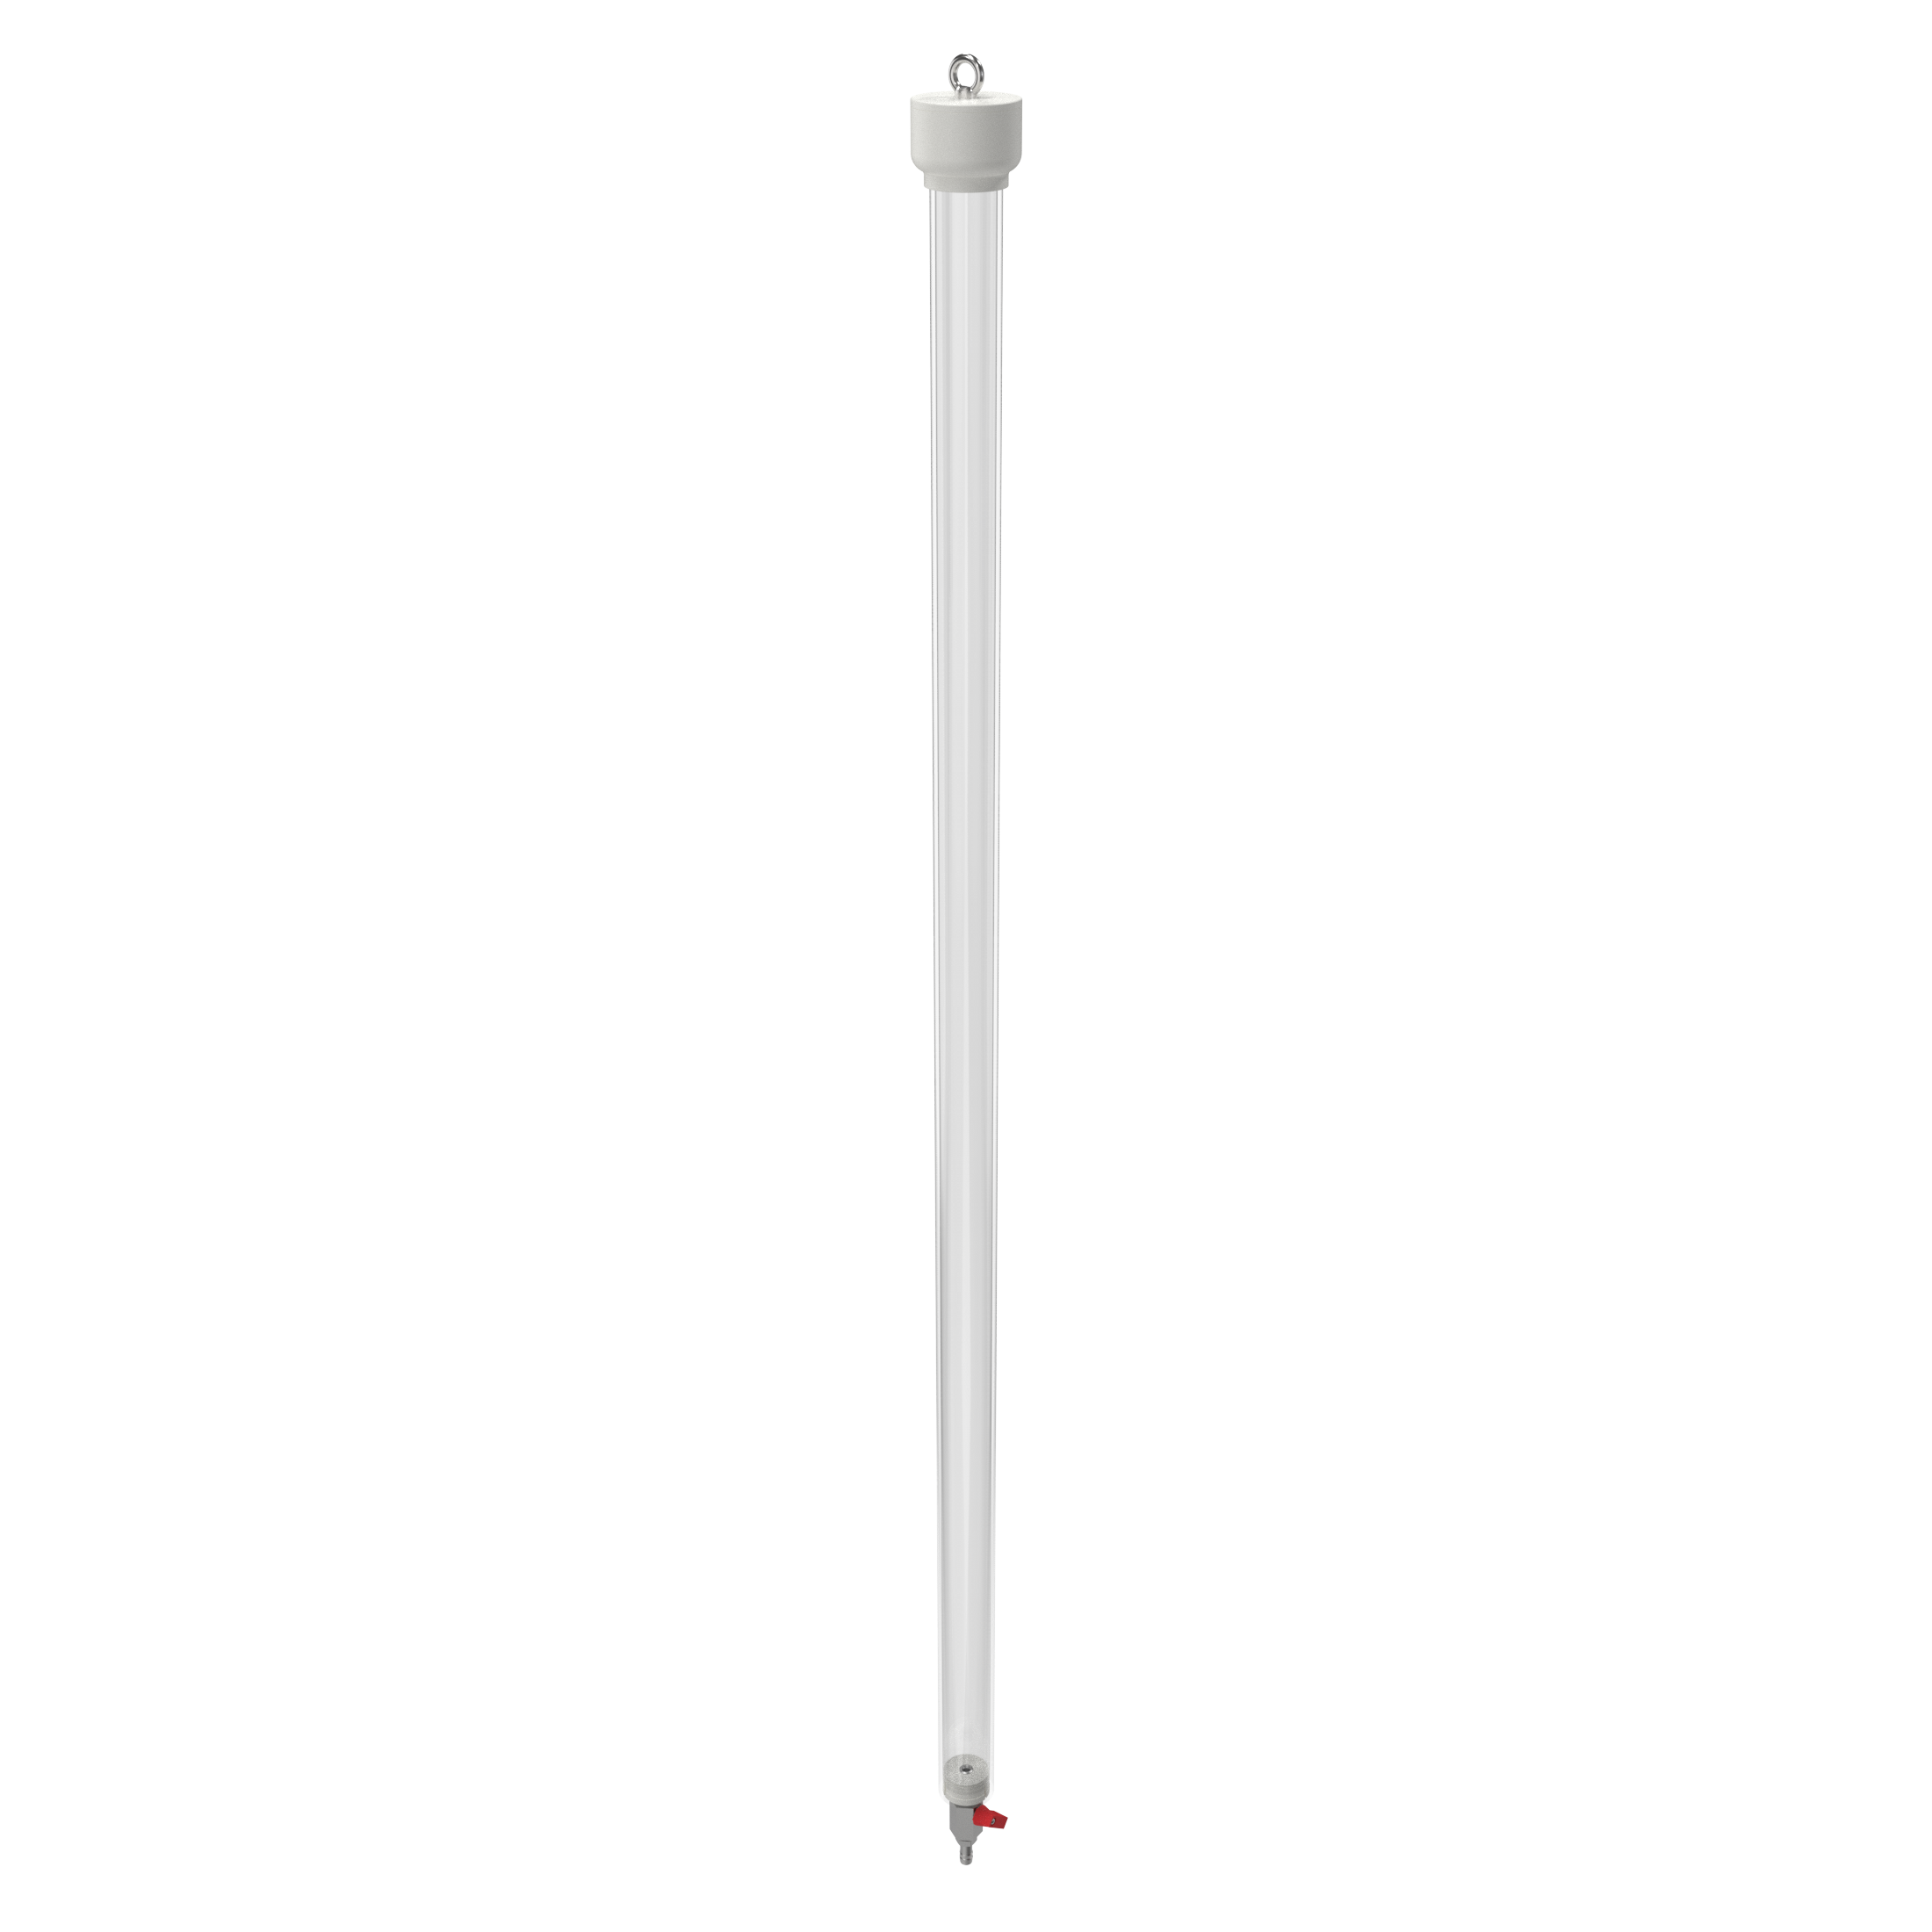 Tube for disinfection of TEE probe 